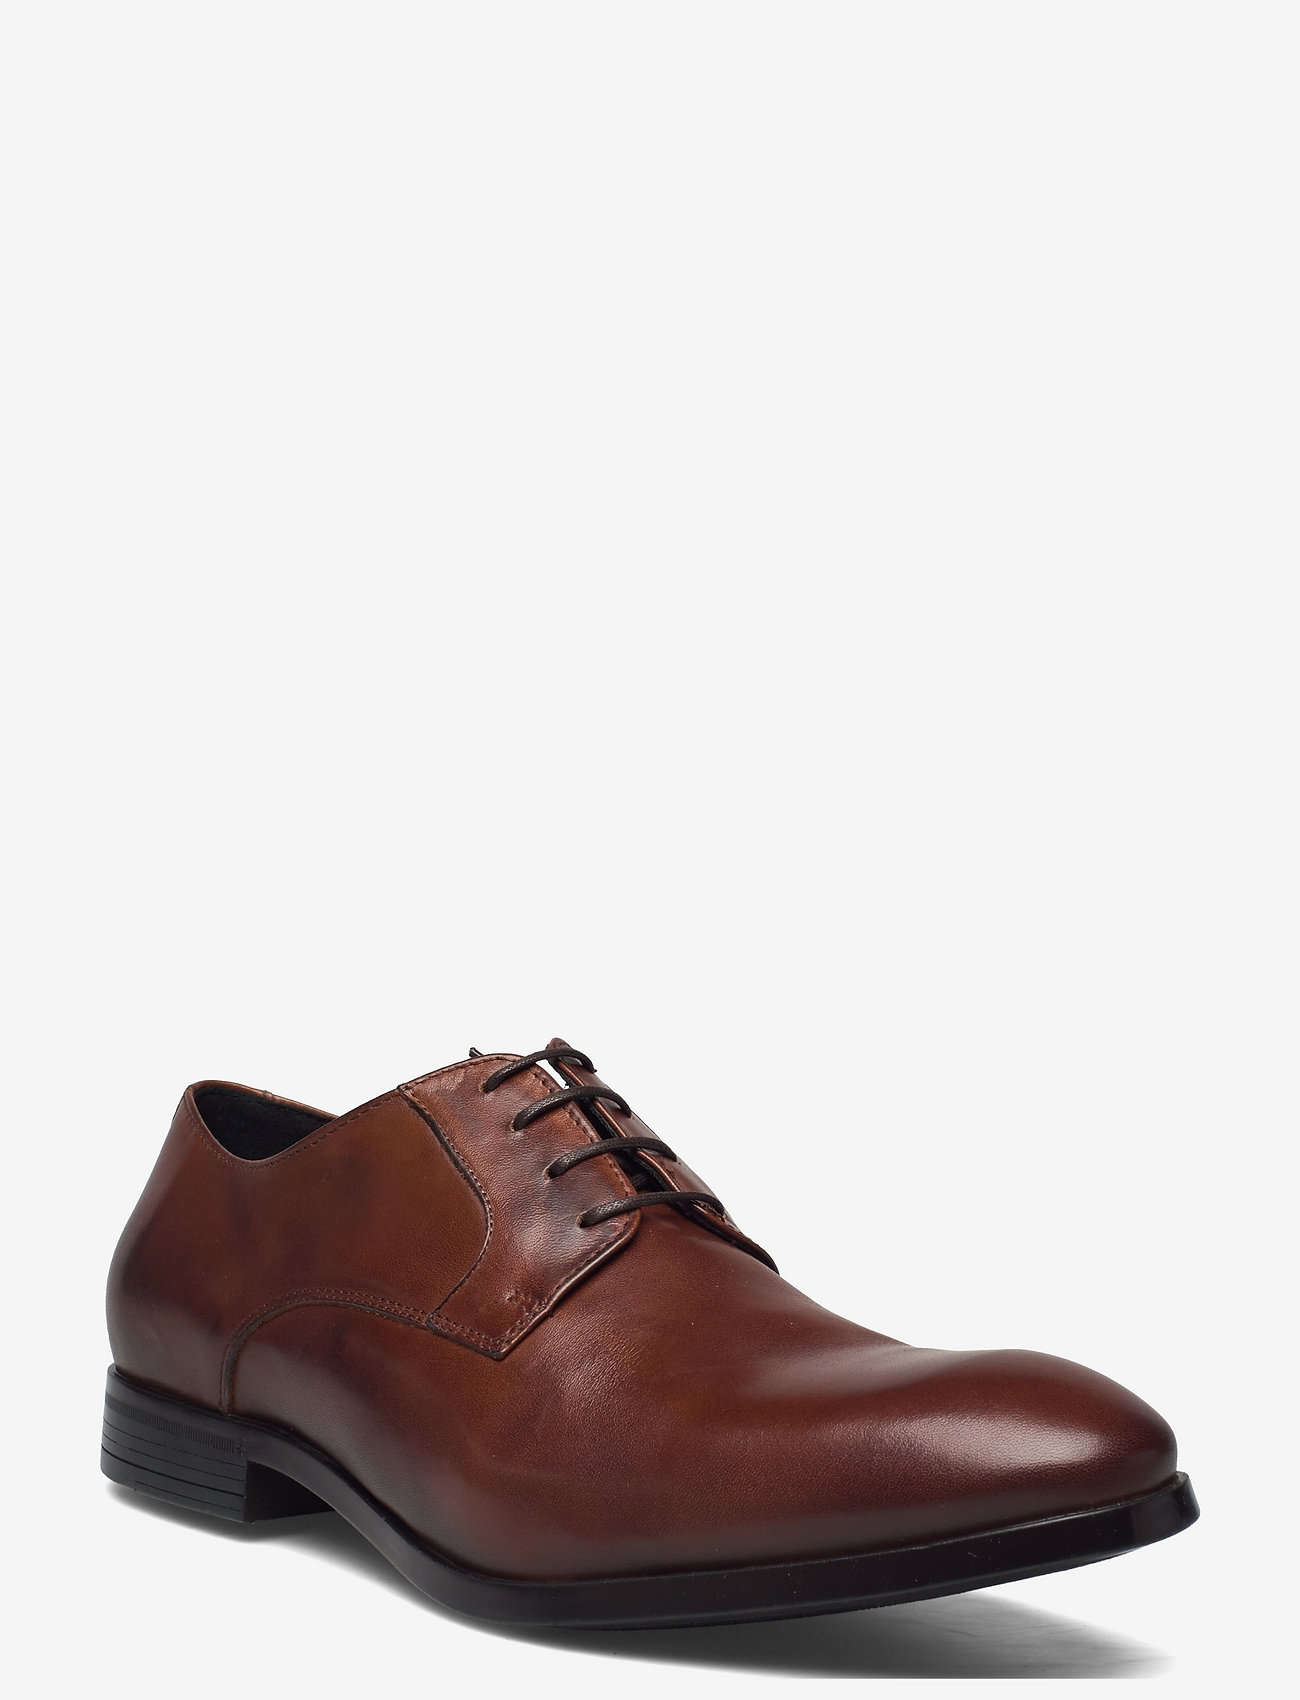 Playboy Footwear - PB10048 - laced shoes - cognac leather - 0